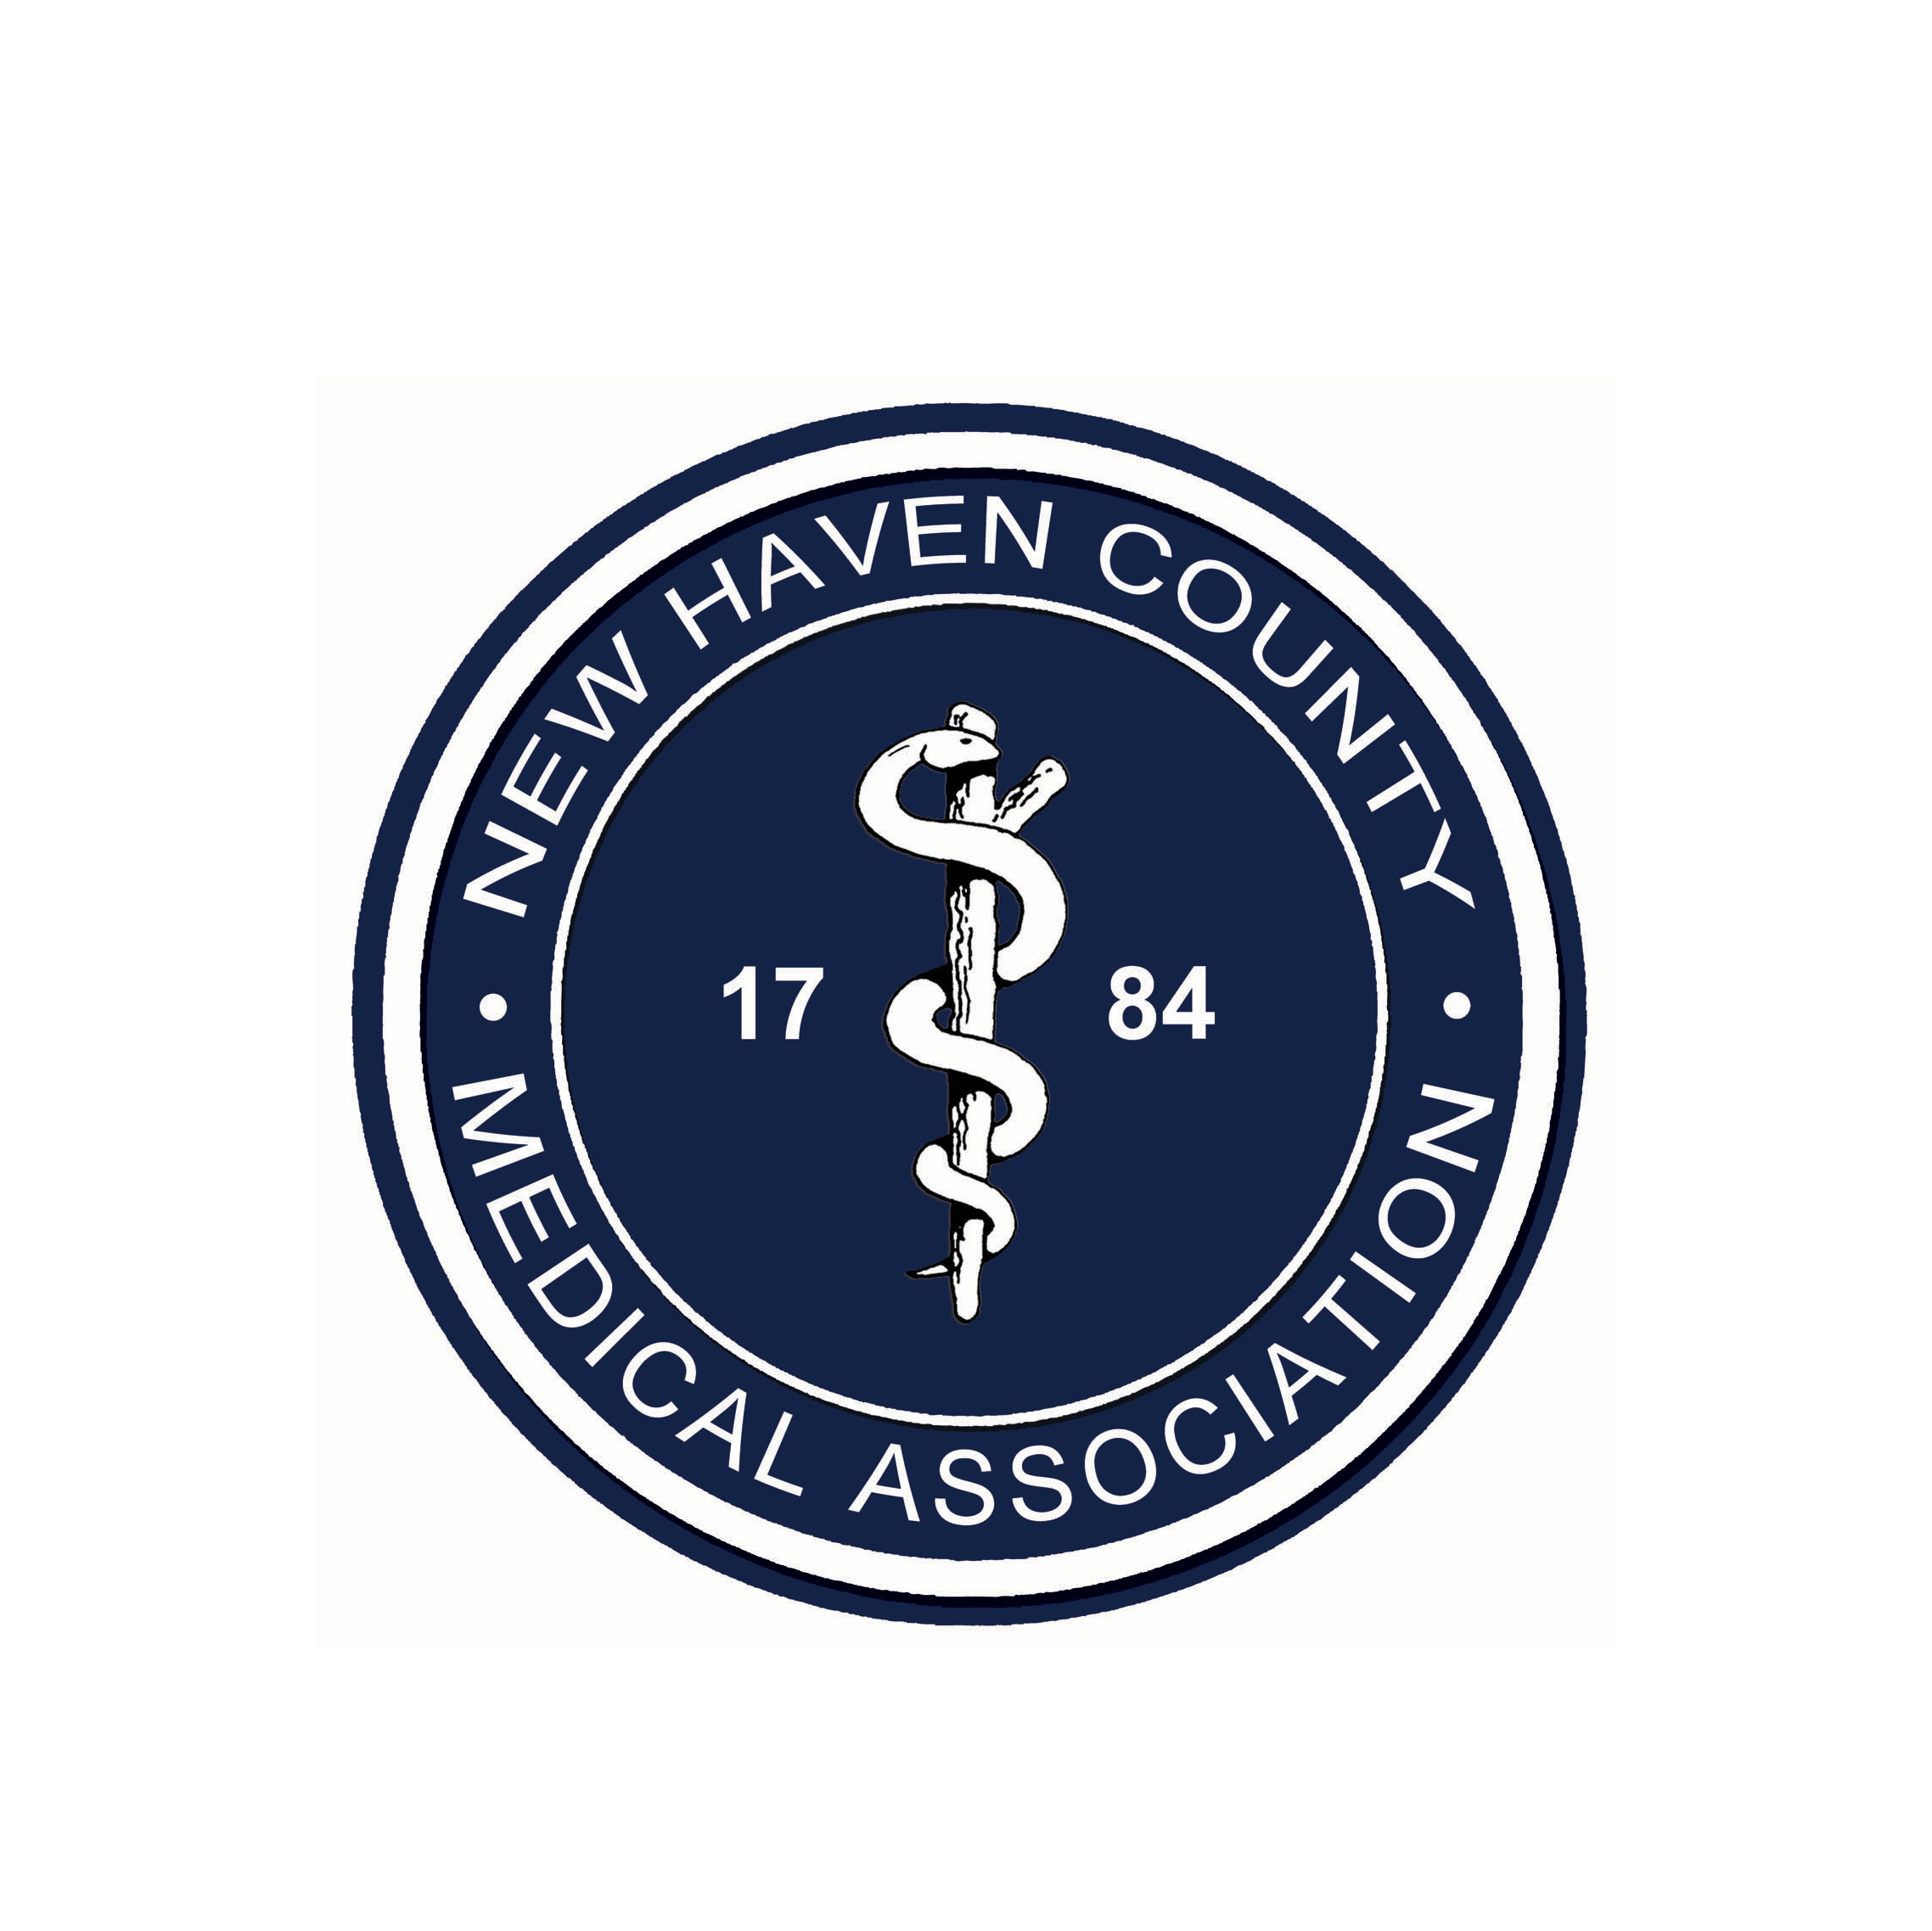 New Haven County Medical Association